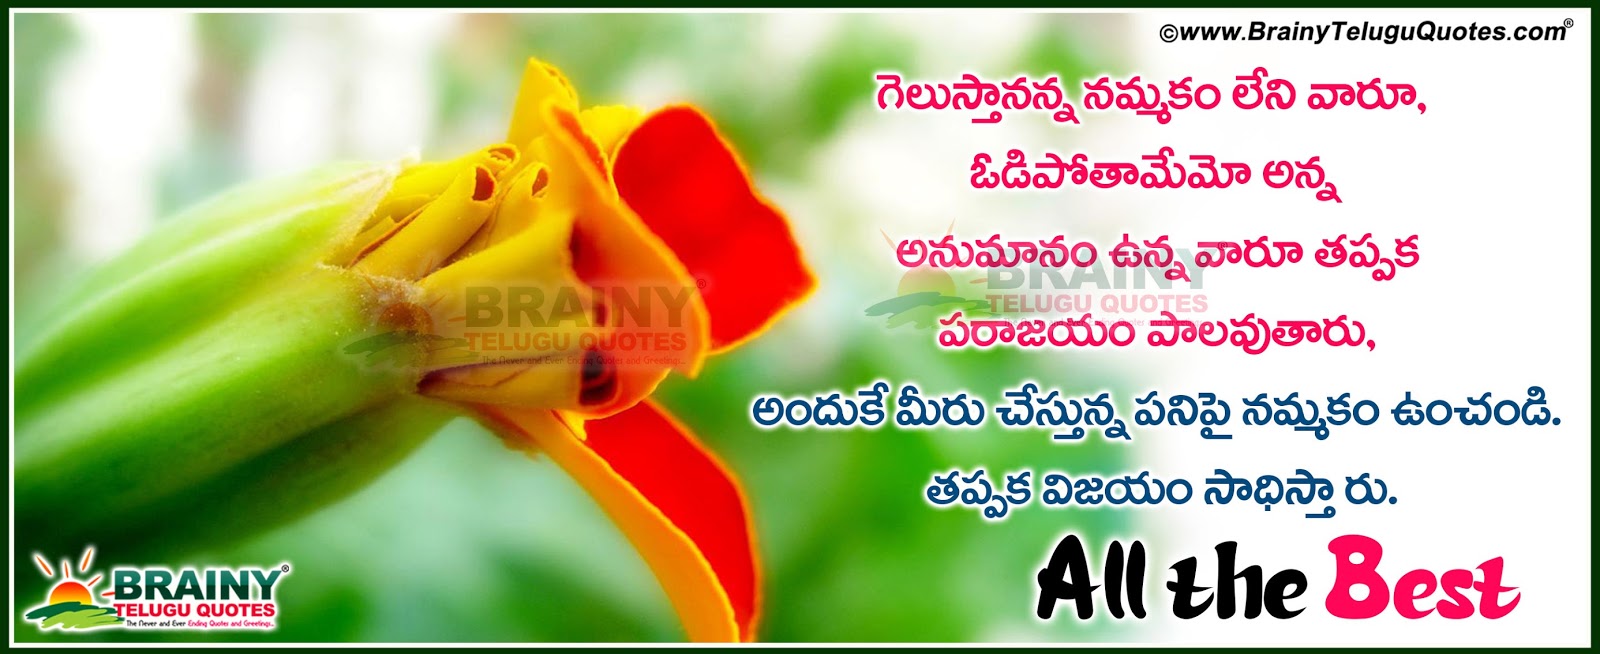 Inspirational quotes in telugu for cover pics Friendship quotes for cover pics